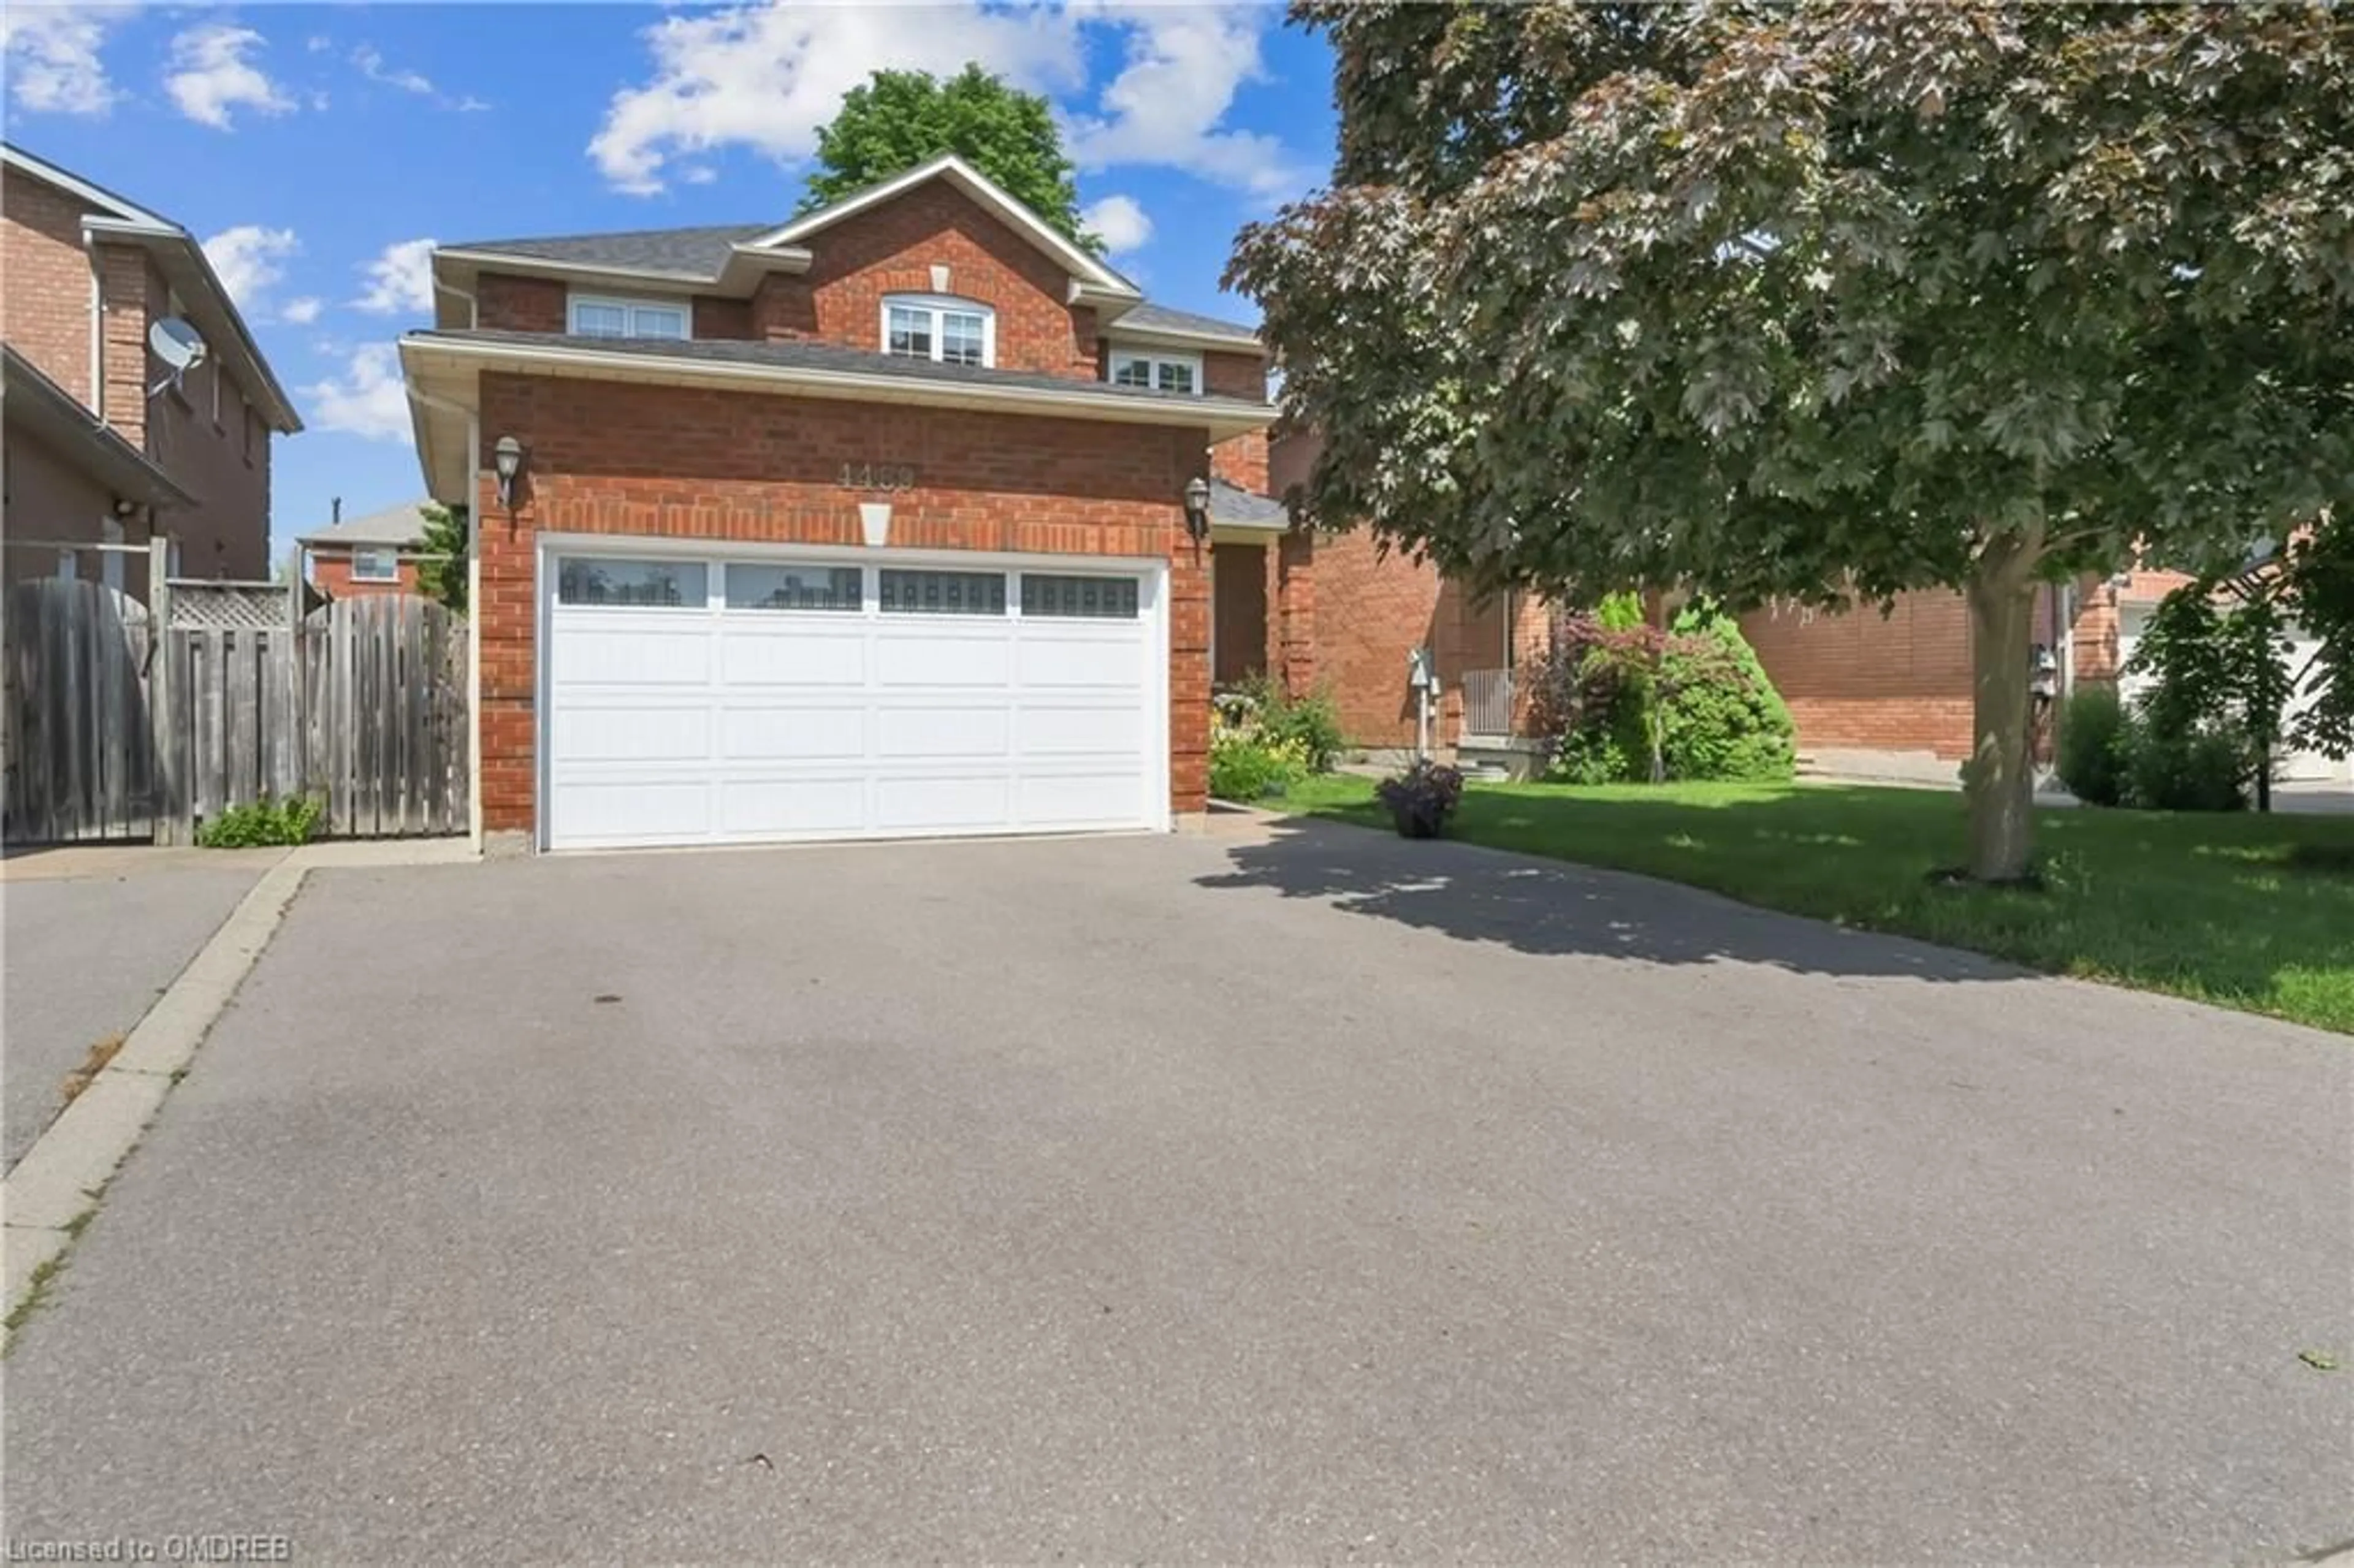 Home with brick exterior material for 4489 Stonemill Crt, Mississauga Ontario L5V 1E5